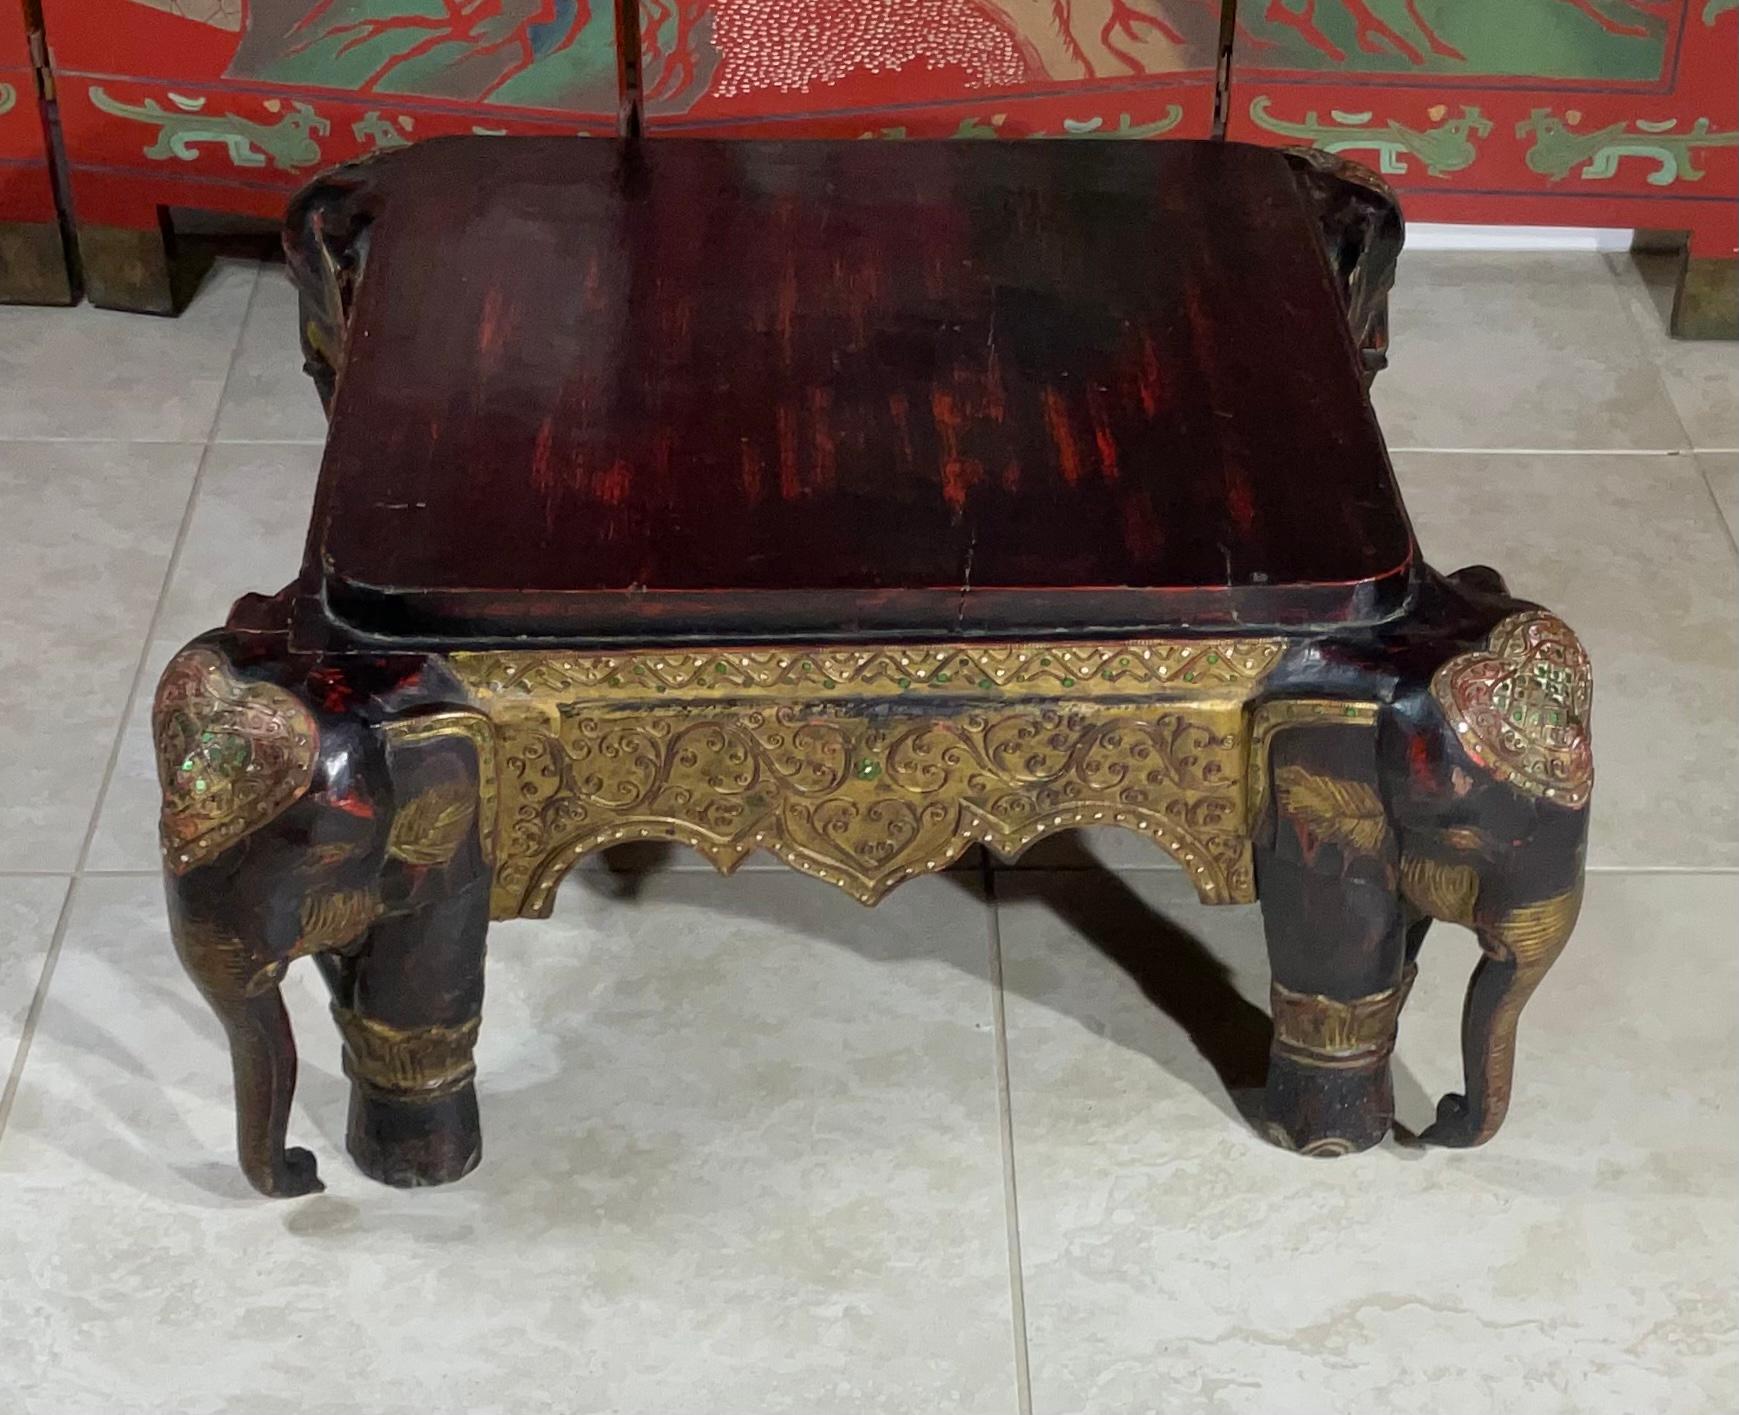 Exceptional hand carved wood stool made of four sides of elephants decorated with hand painted vine decorations with hand embedded glass beads.
Could use as low coffee table ,or very low sitting stool.
Great object of art for display.